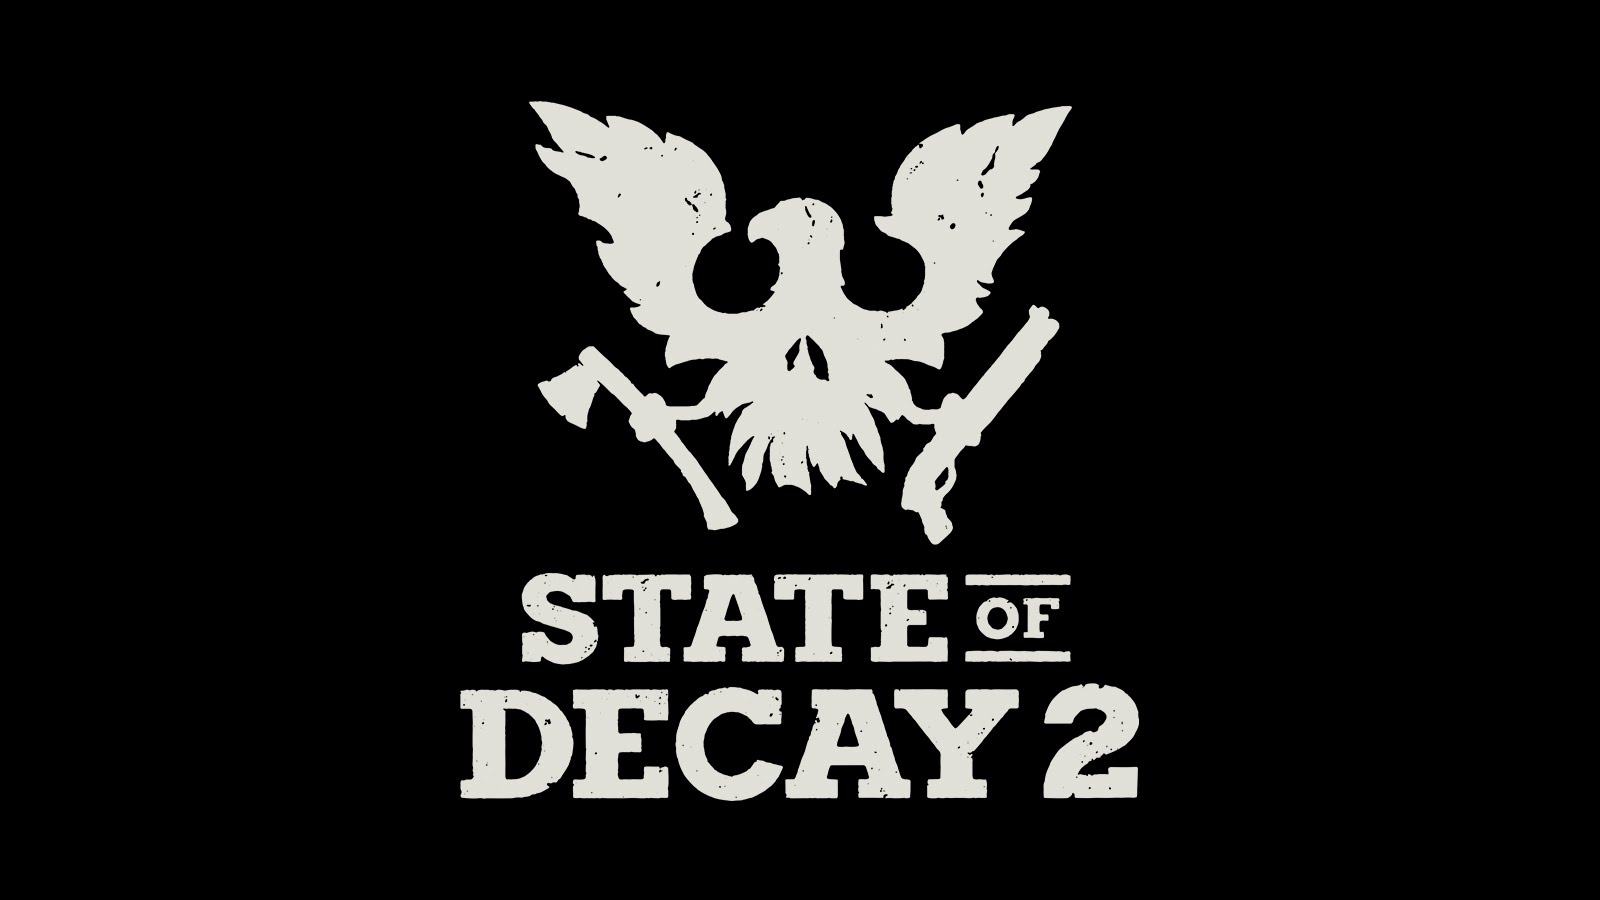 State of decay 2 gameplay